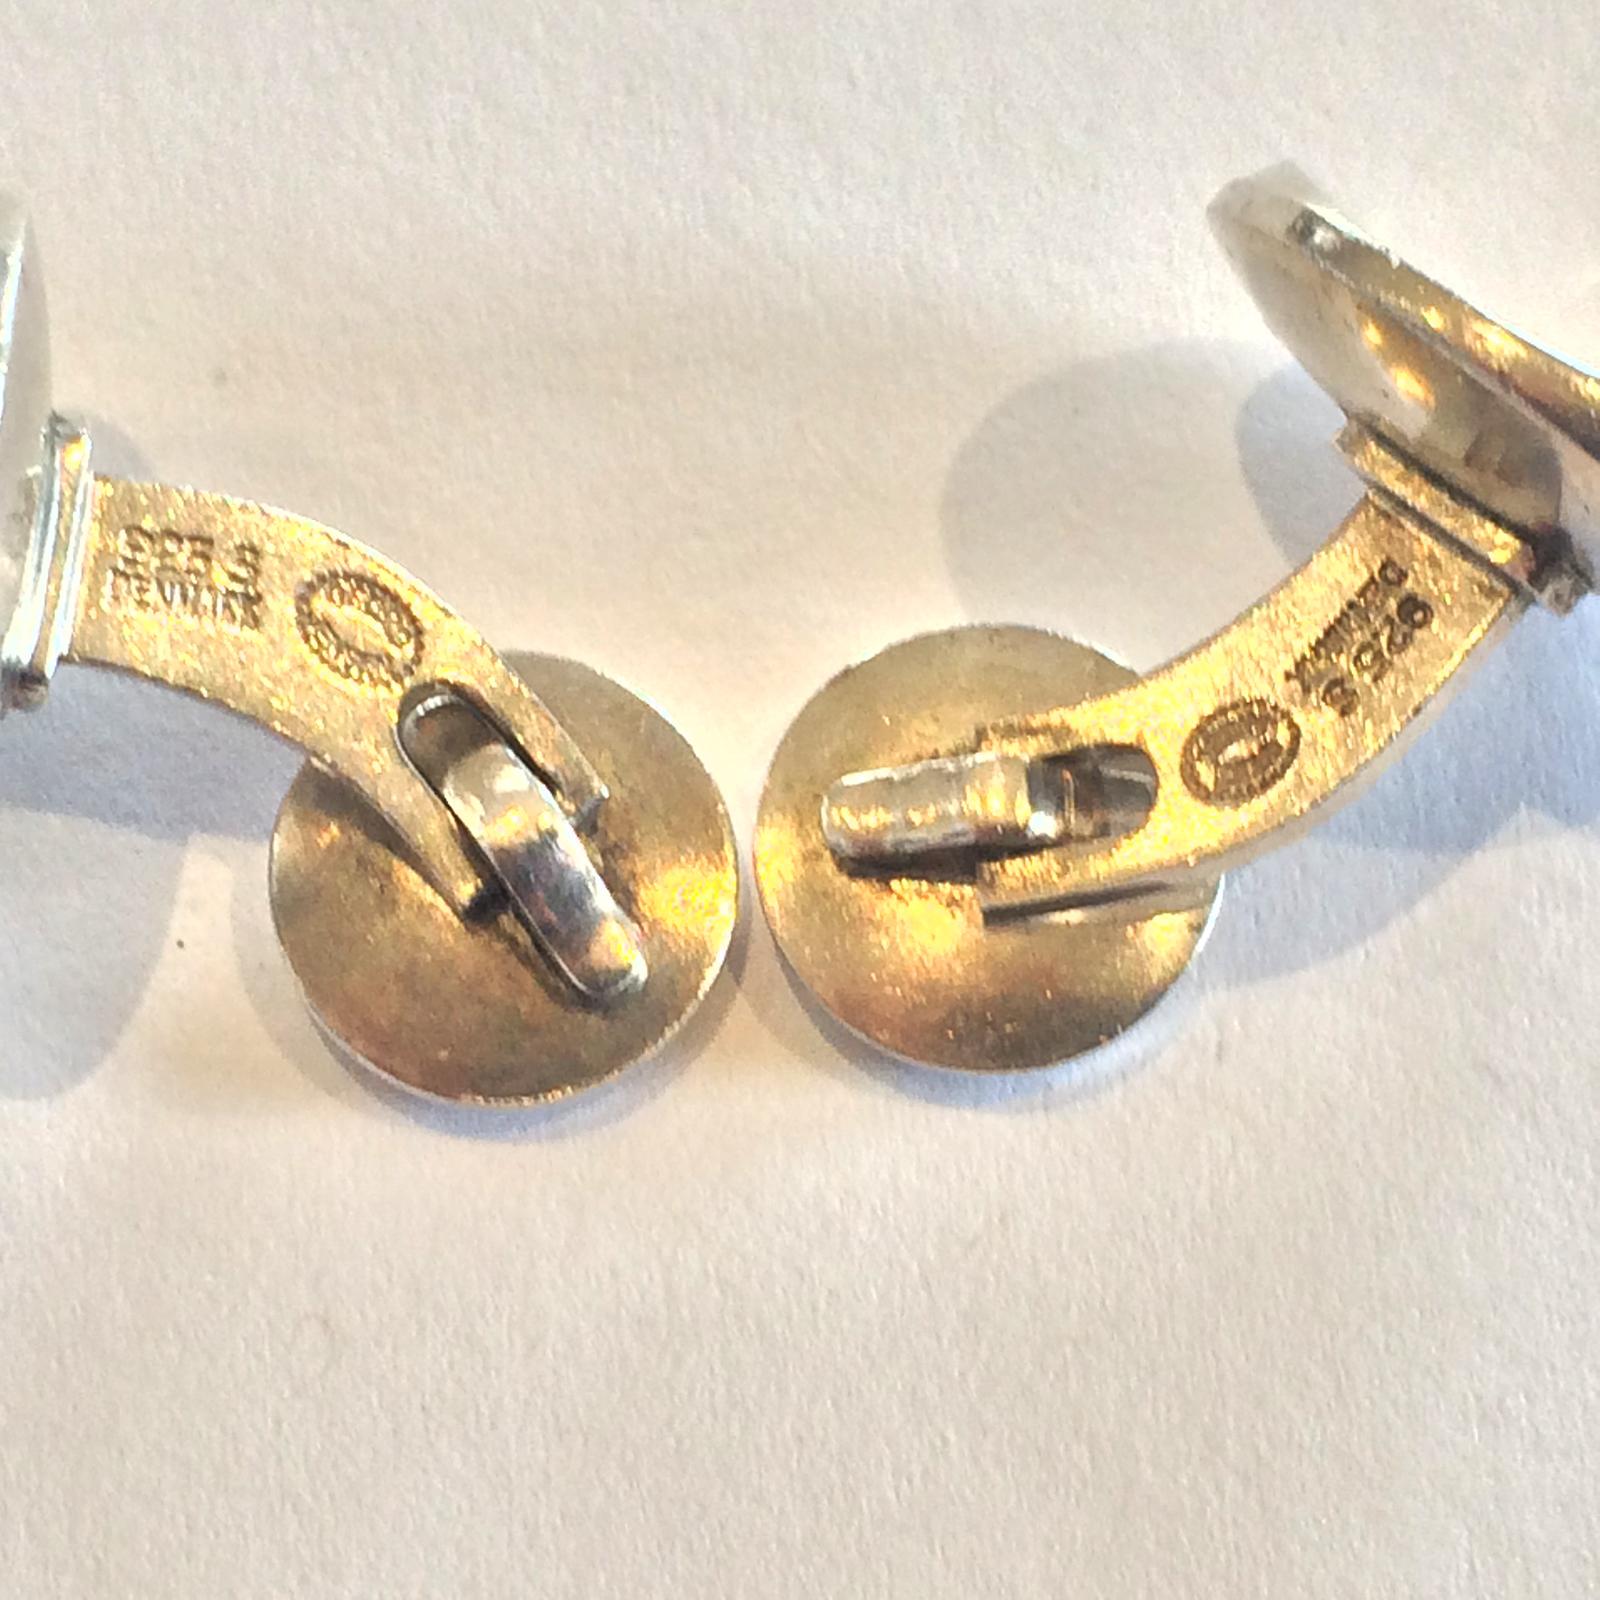 Georg Jensen Vintage Cufflinks, design No. “74 C”, by Nanna Ditzel. In perfect condition and clear Hallmarks, “925 S”, over “Denmark”, beside the standard Jensen mark of “GEORG”, over “JENSEN”, within a dotted ellipse, and on the reverse bar link,